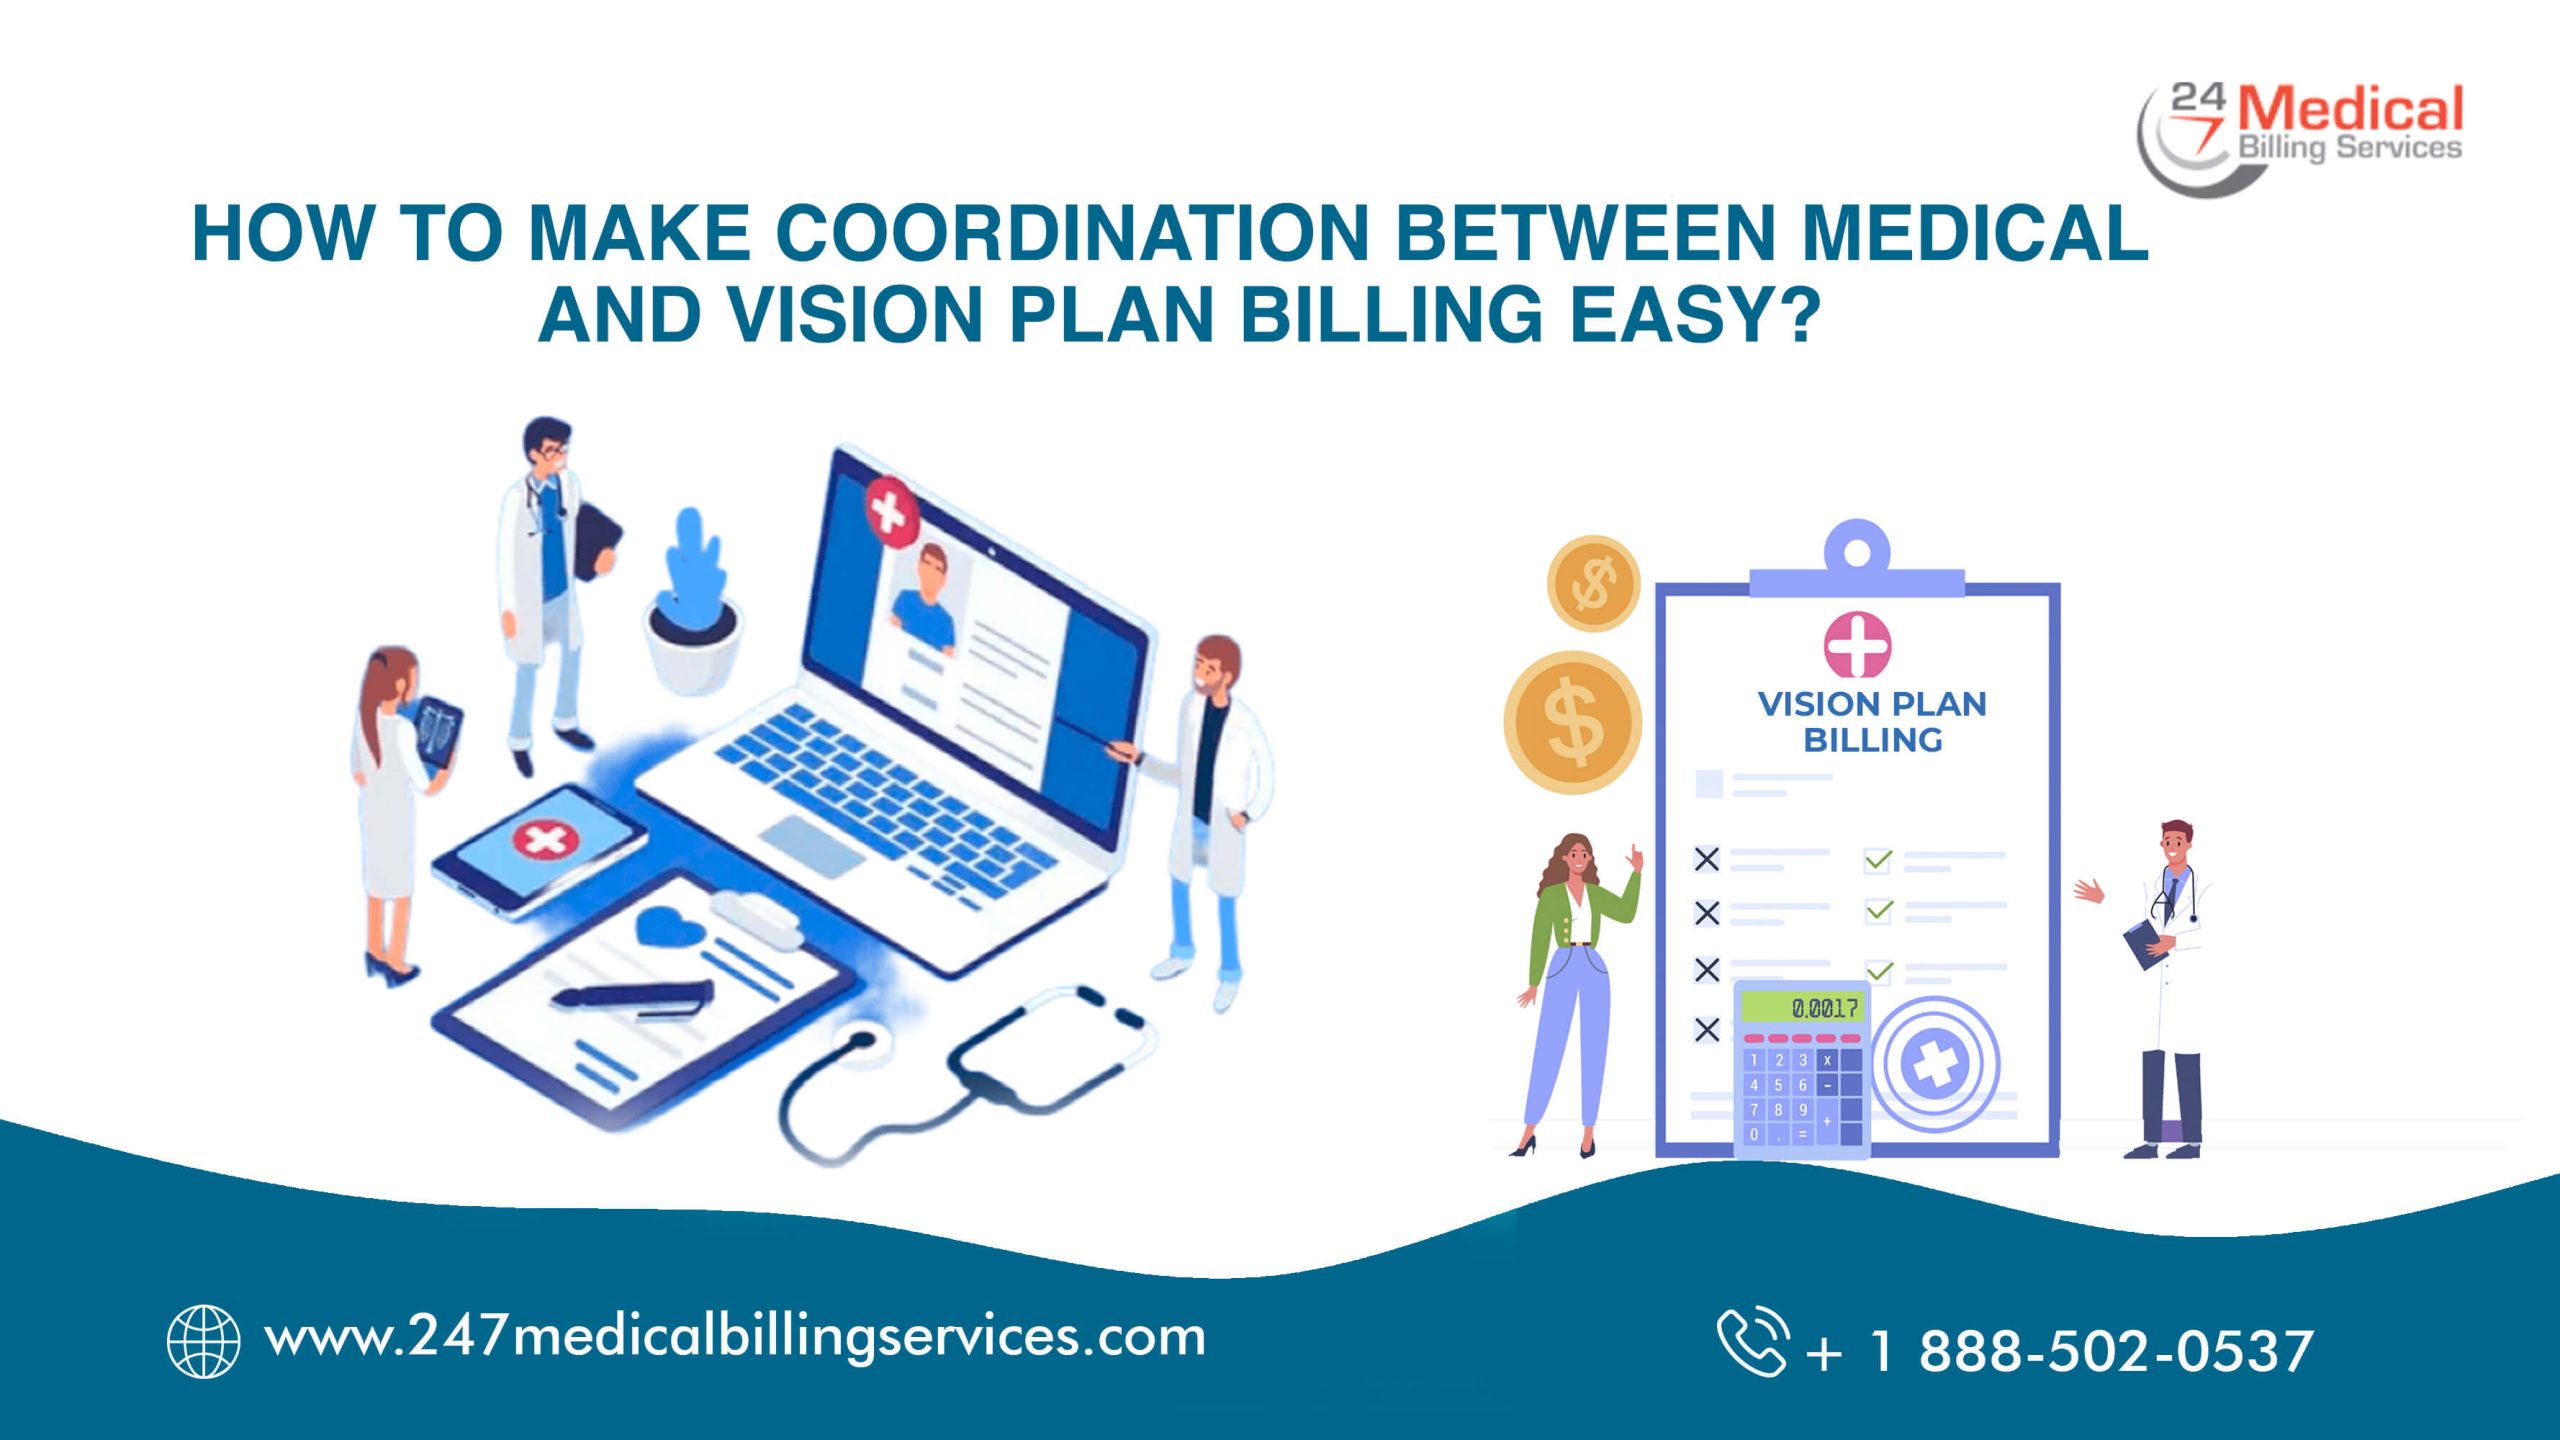  How to Make Coordination between Medical and Vision Plan Billing Easy?